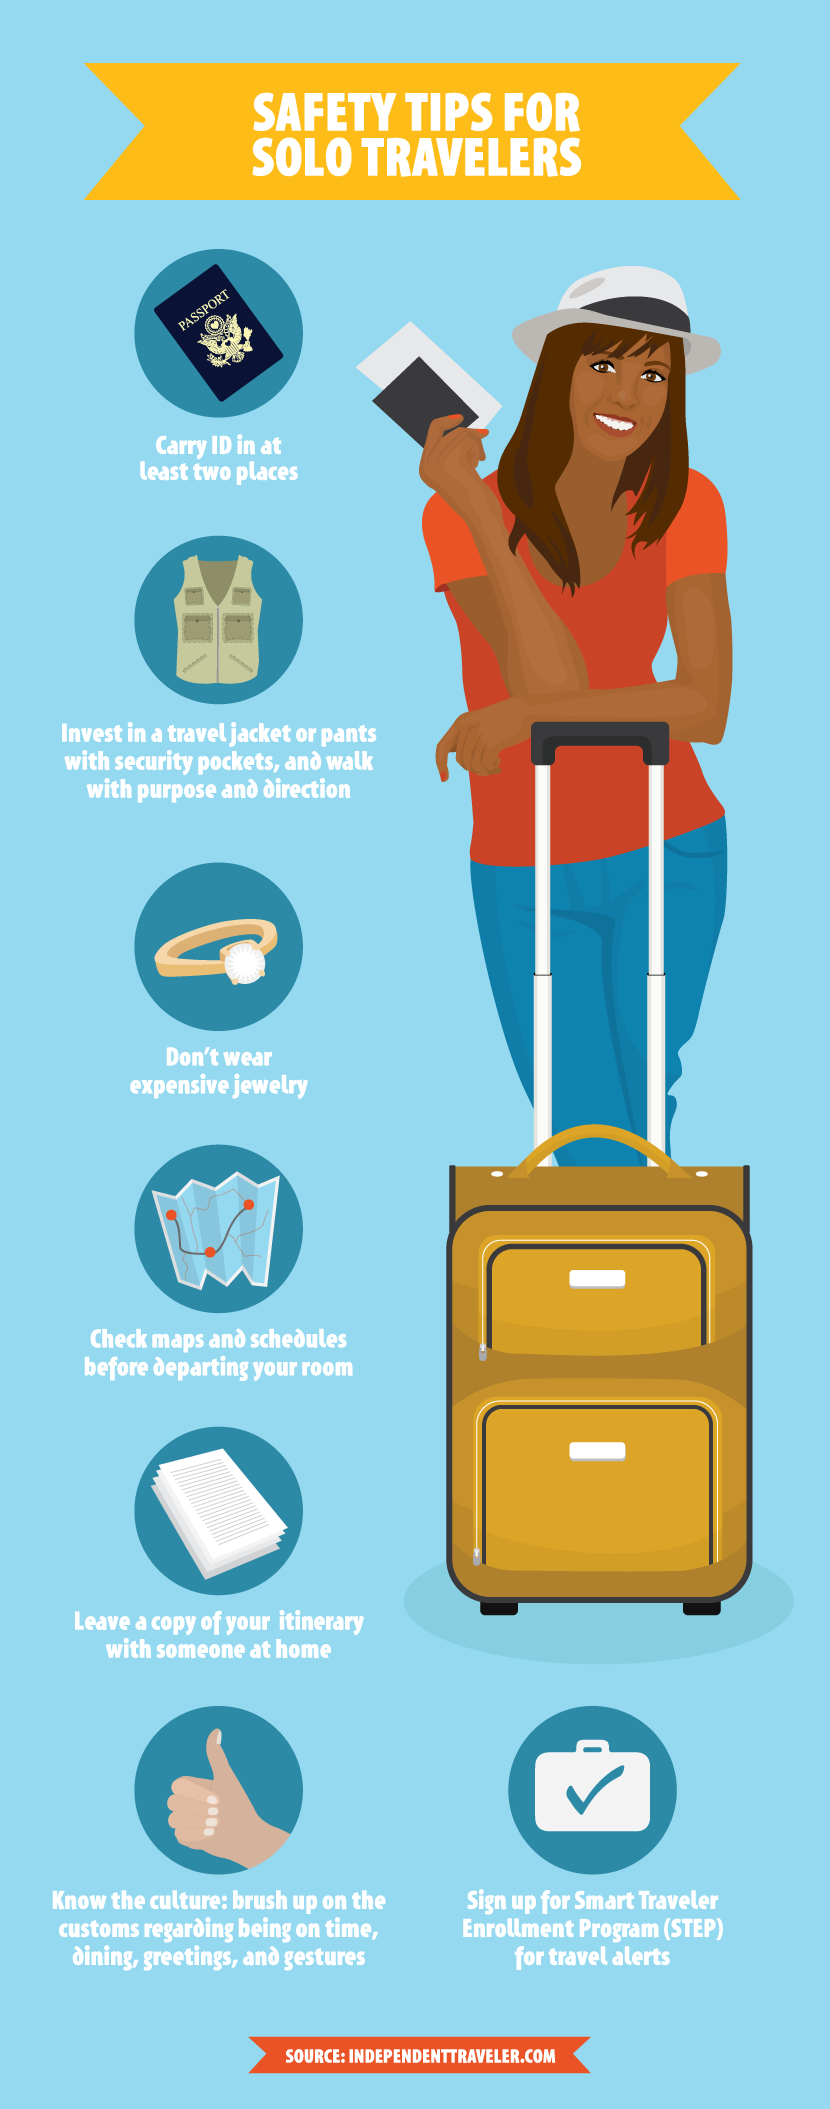 3 Ways to Stay Safe While Solo Traveling